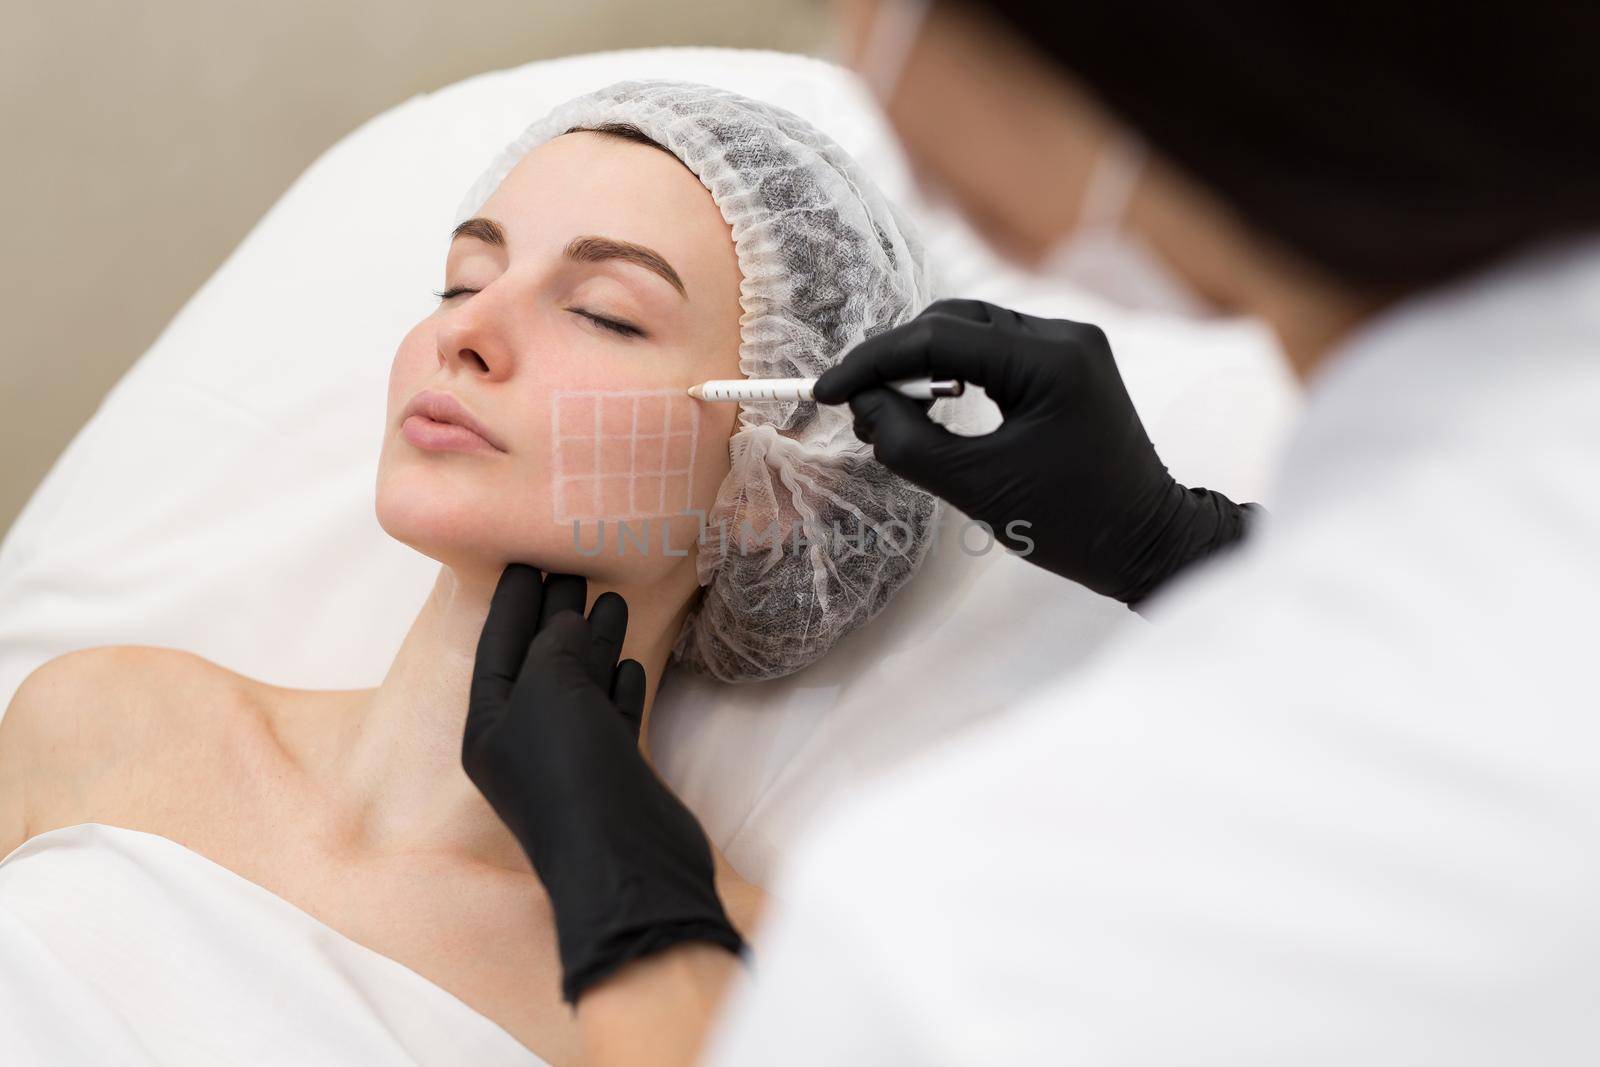 Beautician draws the contours of a white pencil on the face of the patient. Schematic marking before contouring. Close-up preparation of the face for cosmetic plastic surgery